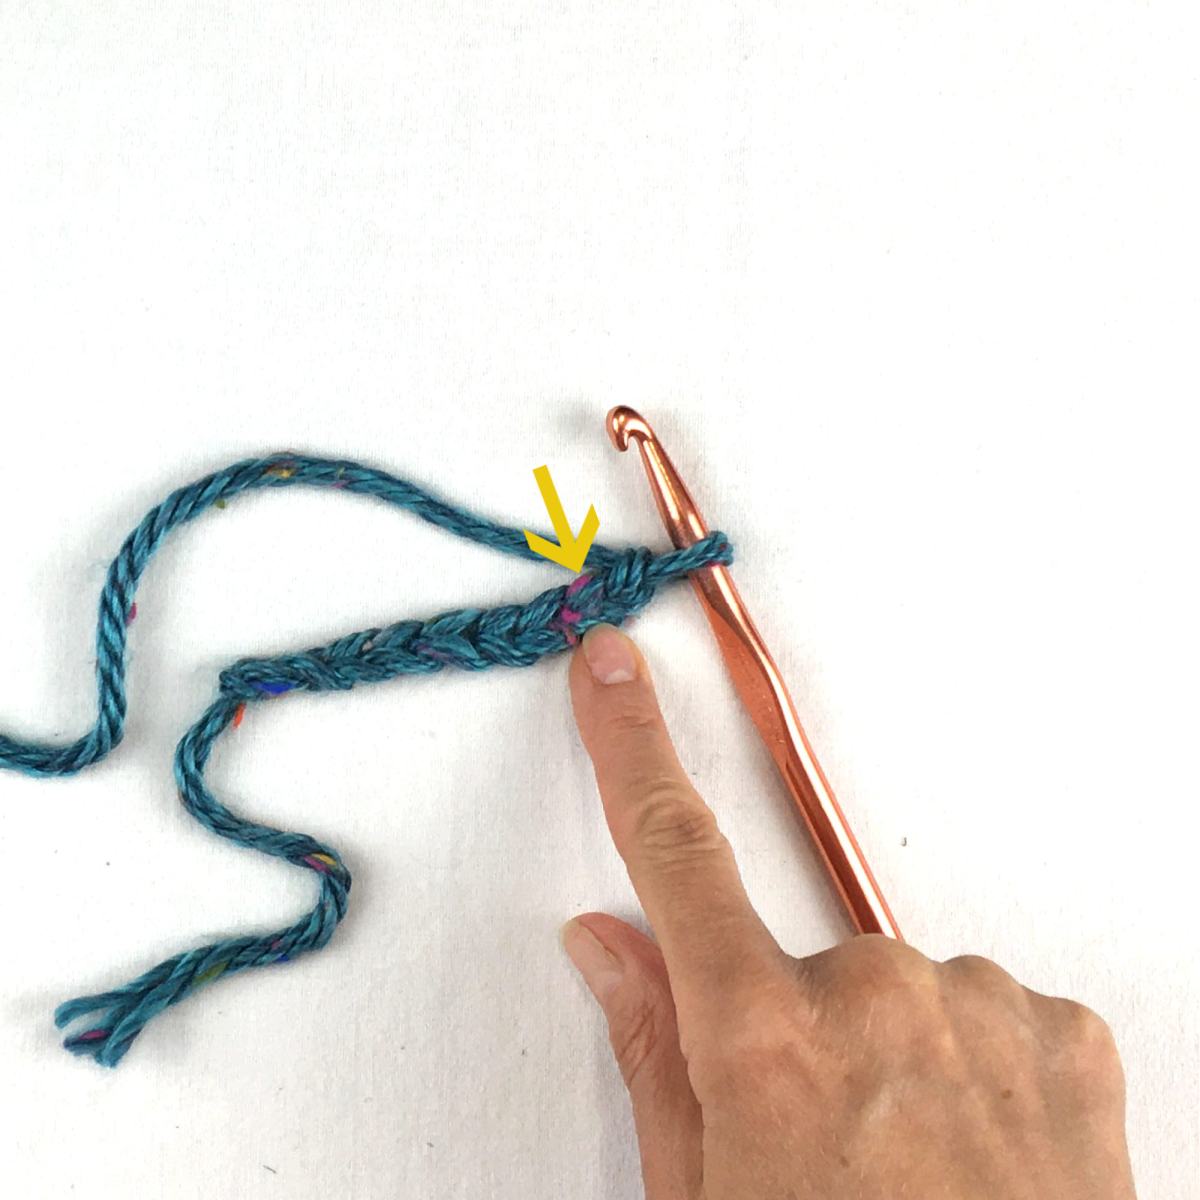 image of a crochet chain and hook